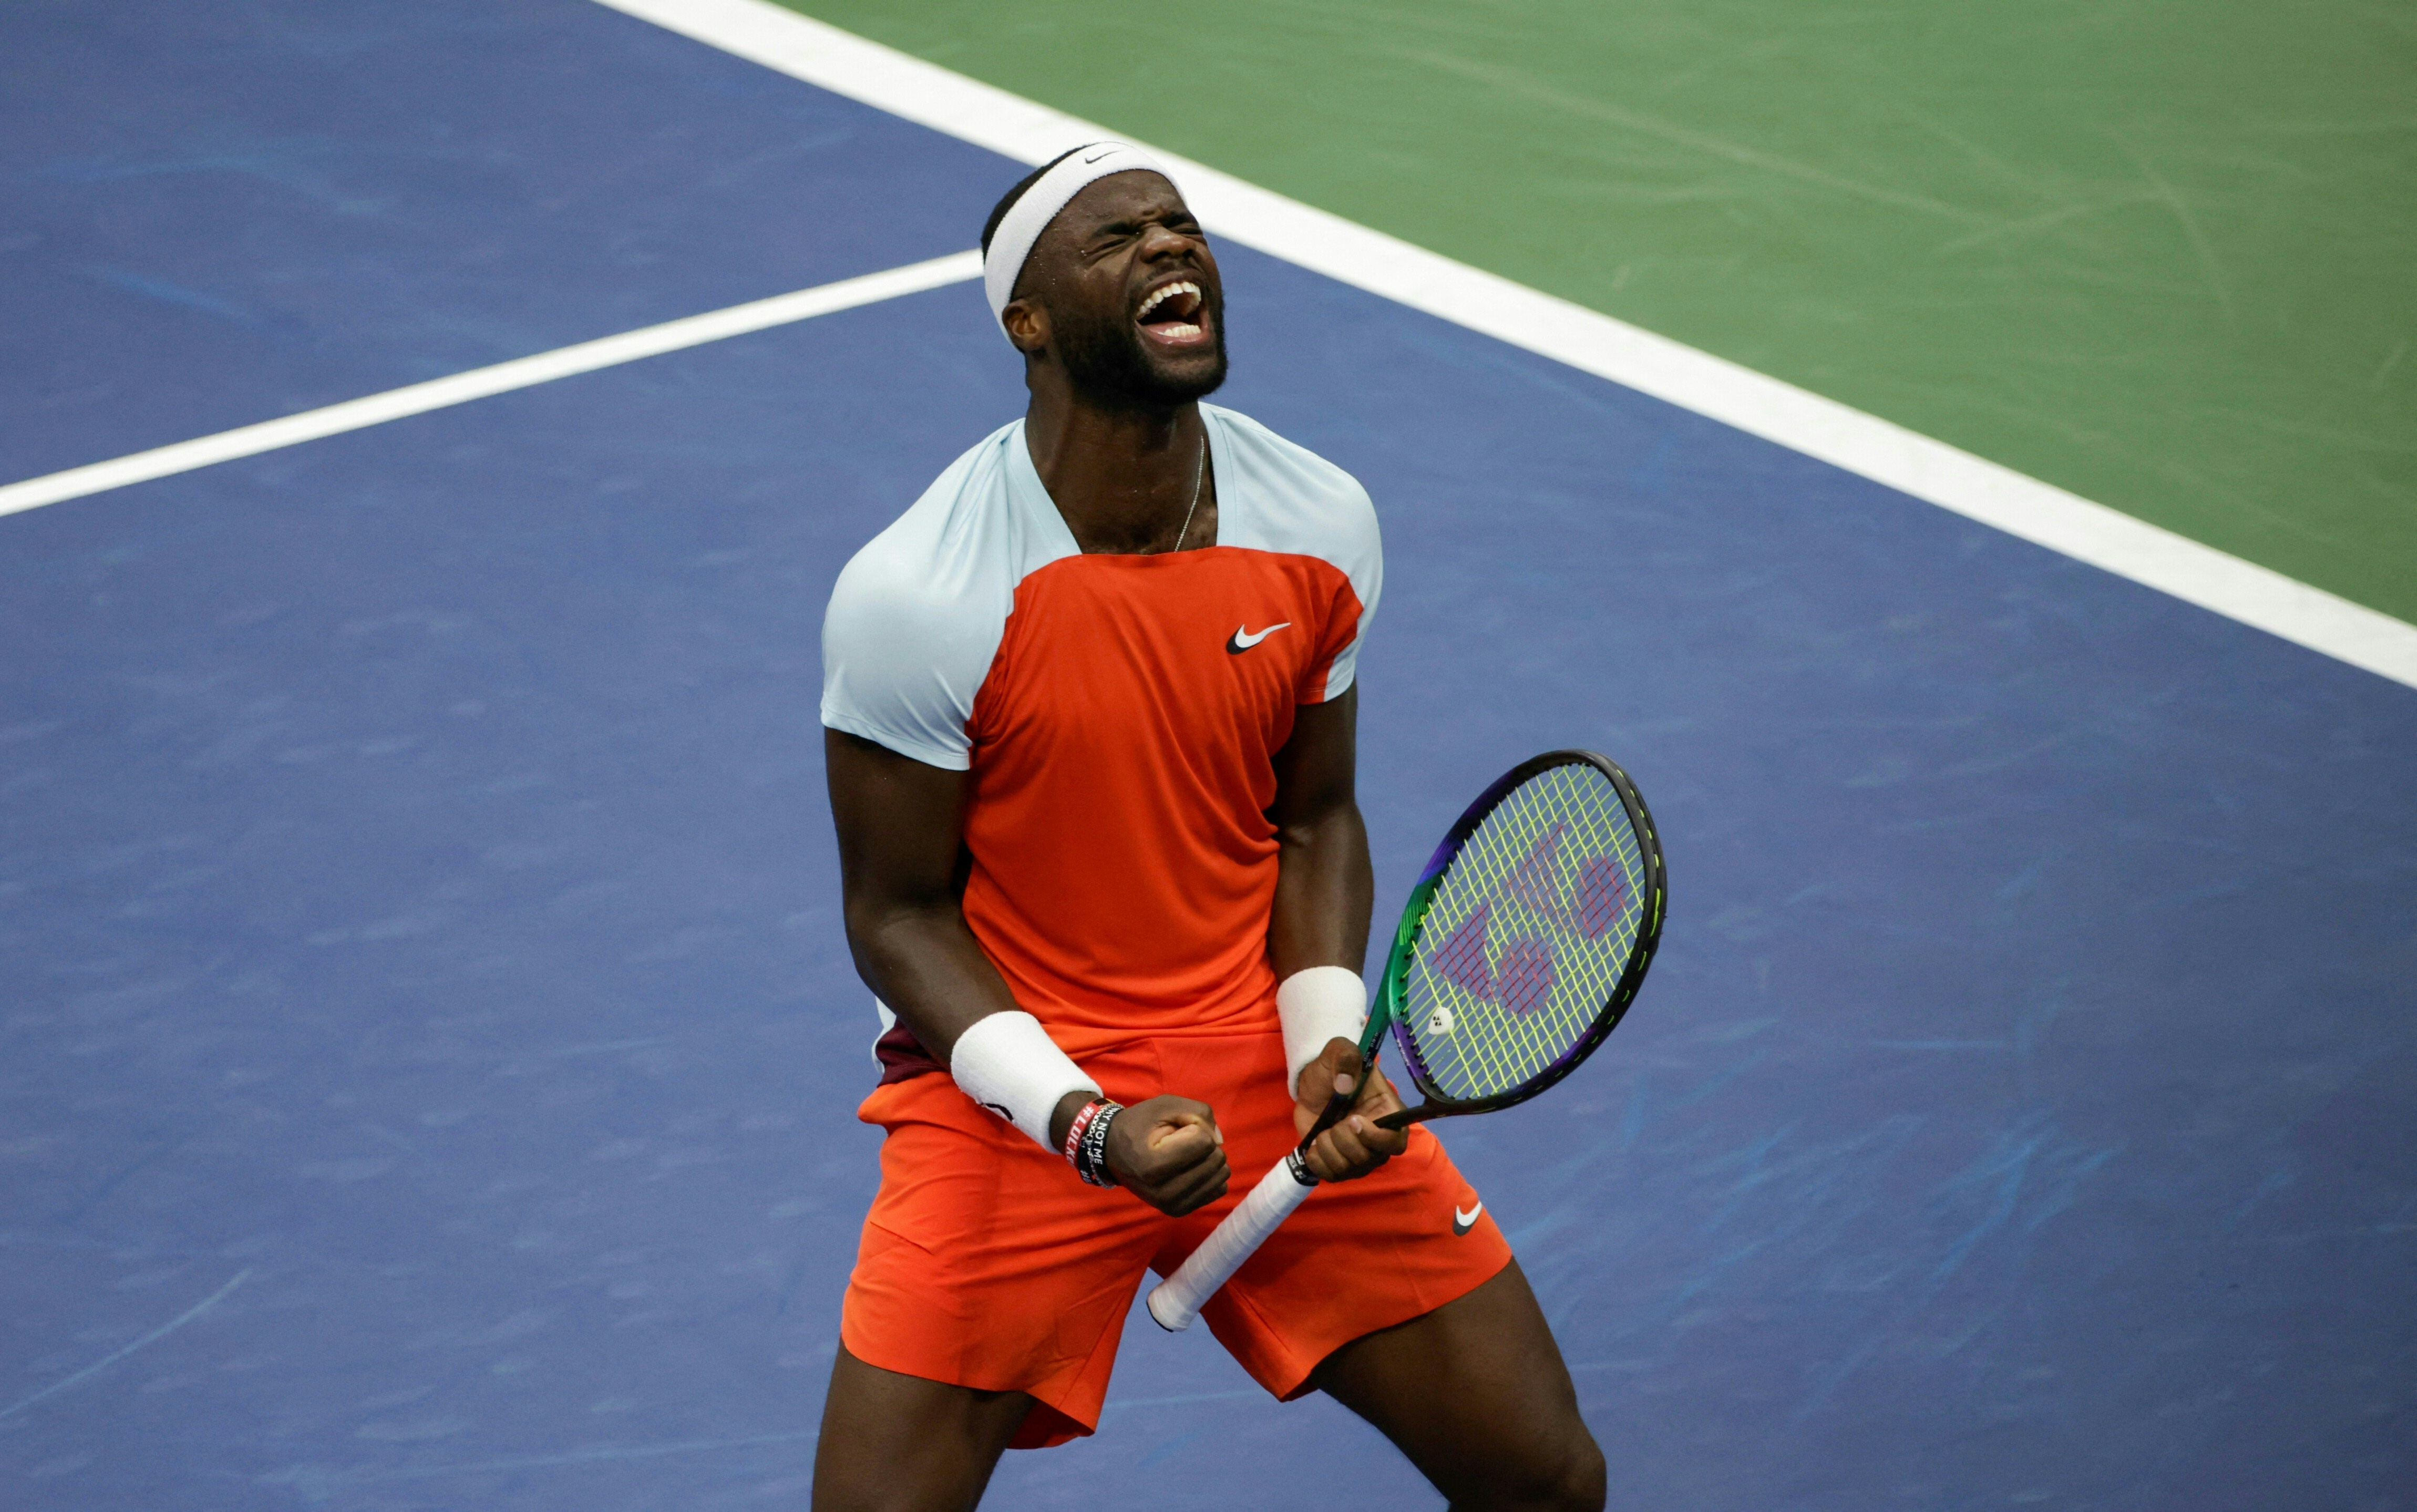 Frances Tiafoe backs up Nadal stunner with Rublev victory to reach milestone US Open semifinal